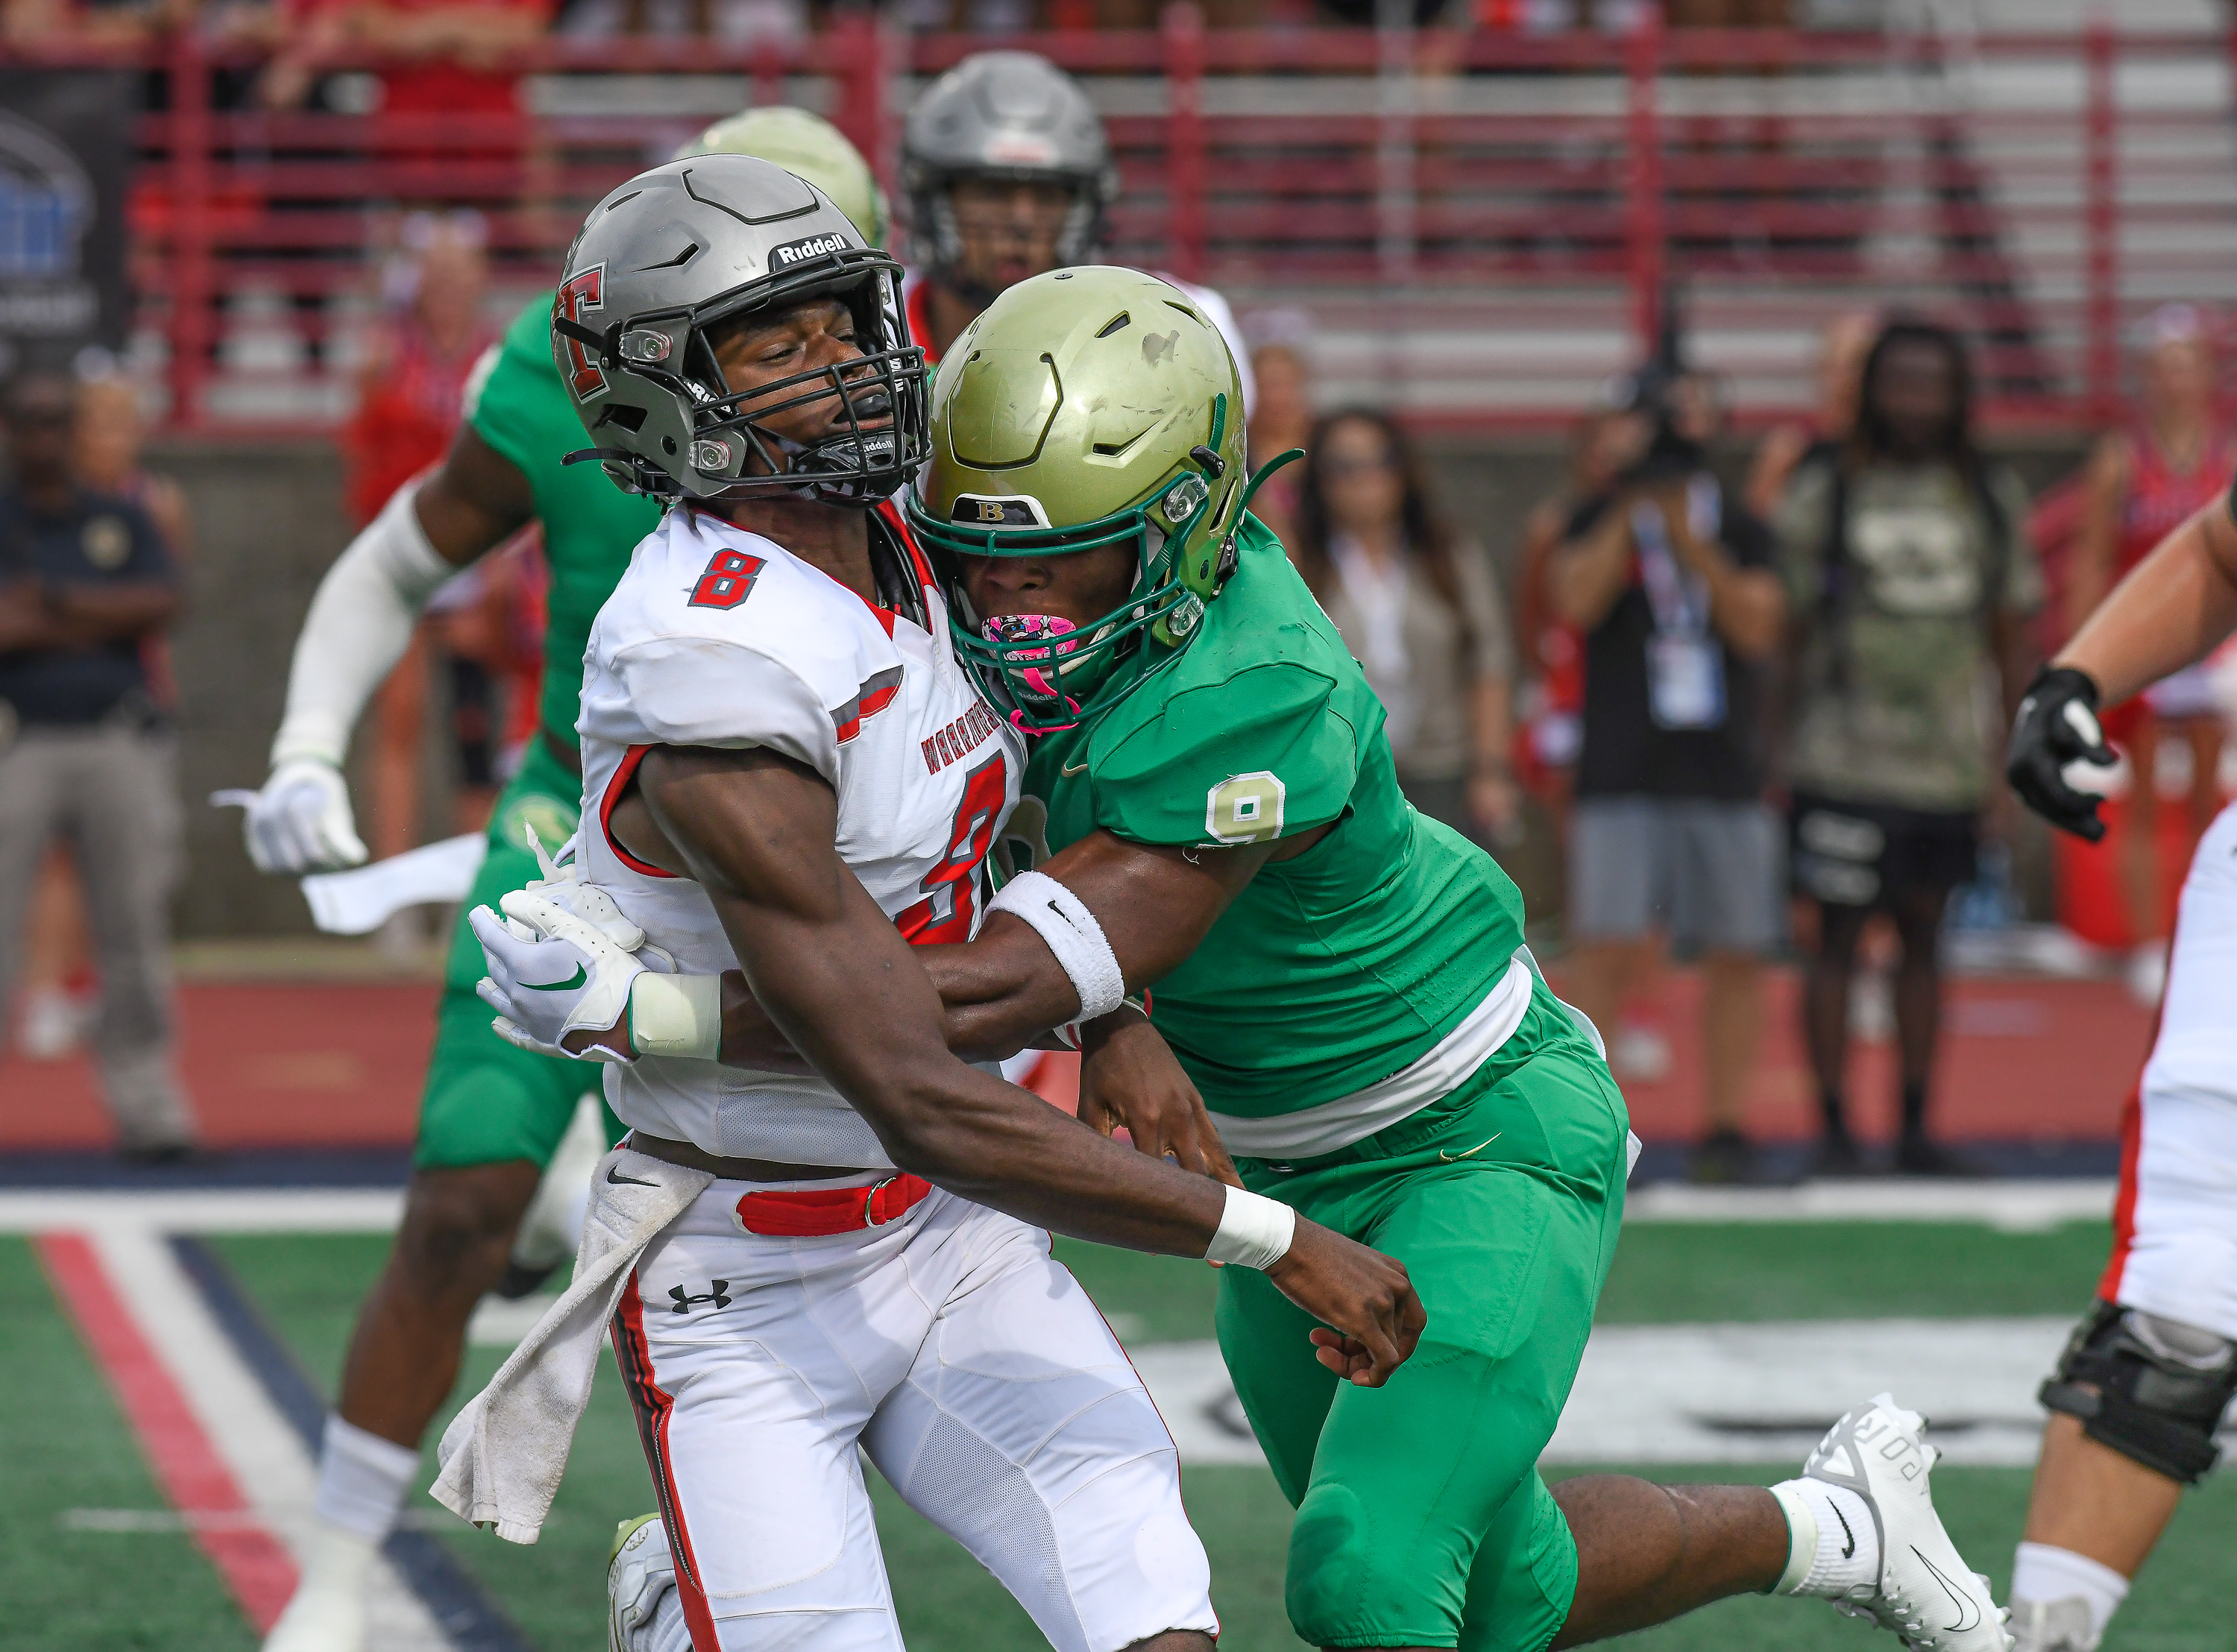 Buford's defense absolutely dominated visiting Thompson (Alabama) and a heavyweight season opener at the Freedom Bowl, Friday night in Milton, Georgia.